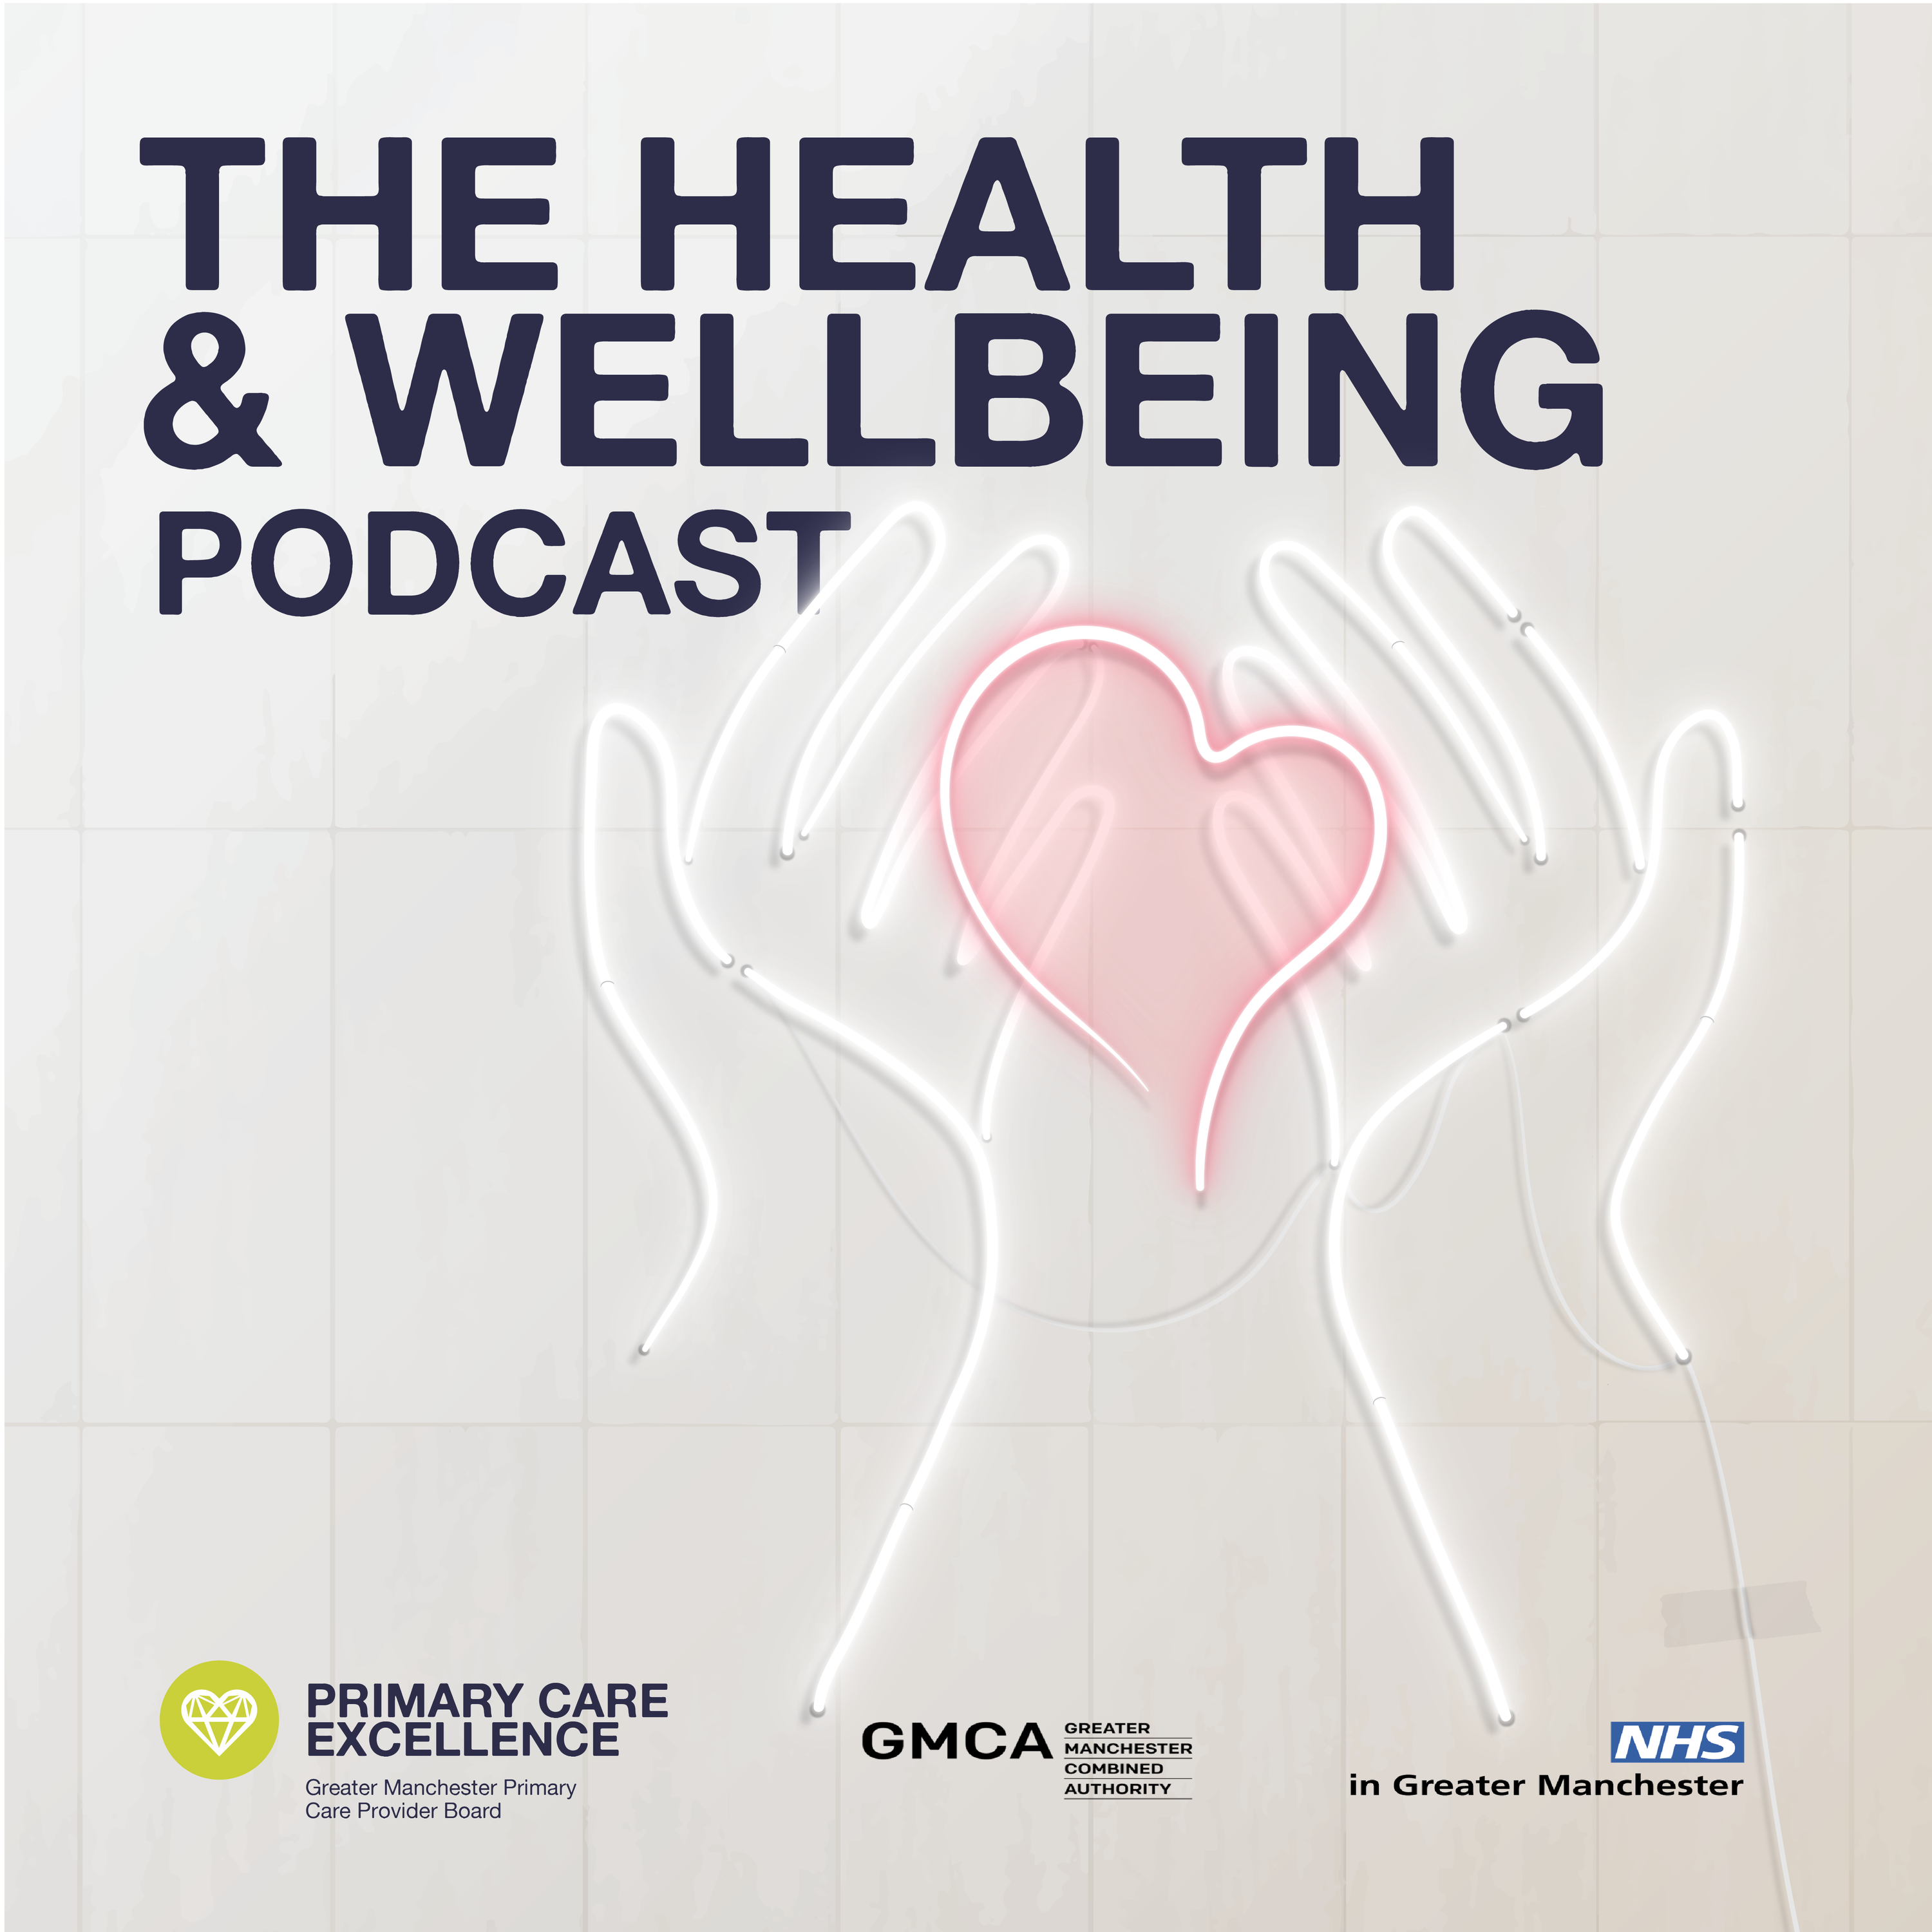 The Greater Manchester Primary Care Health and Wellbeing Programme